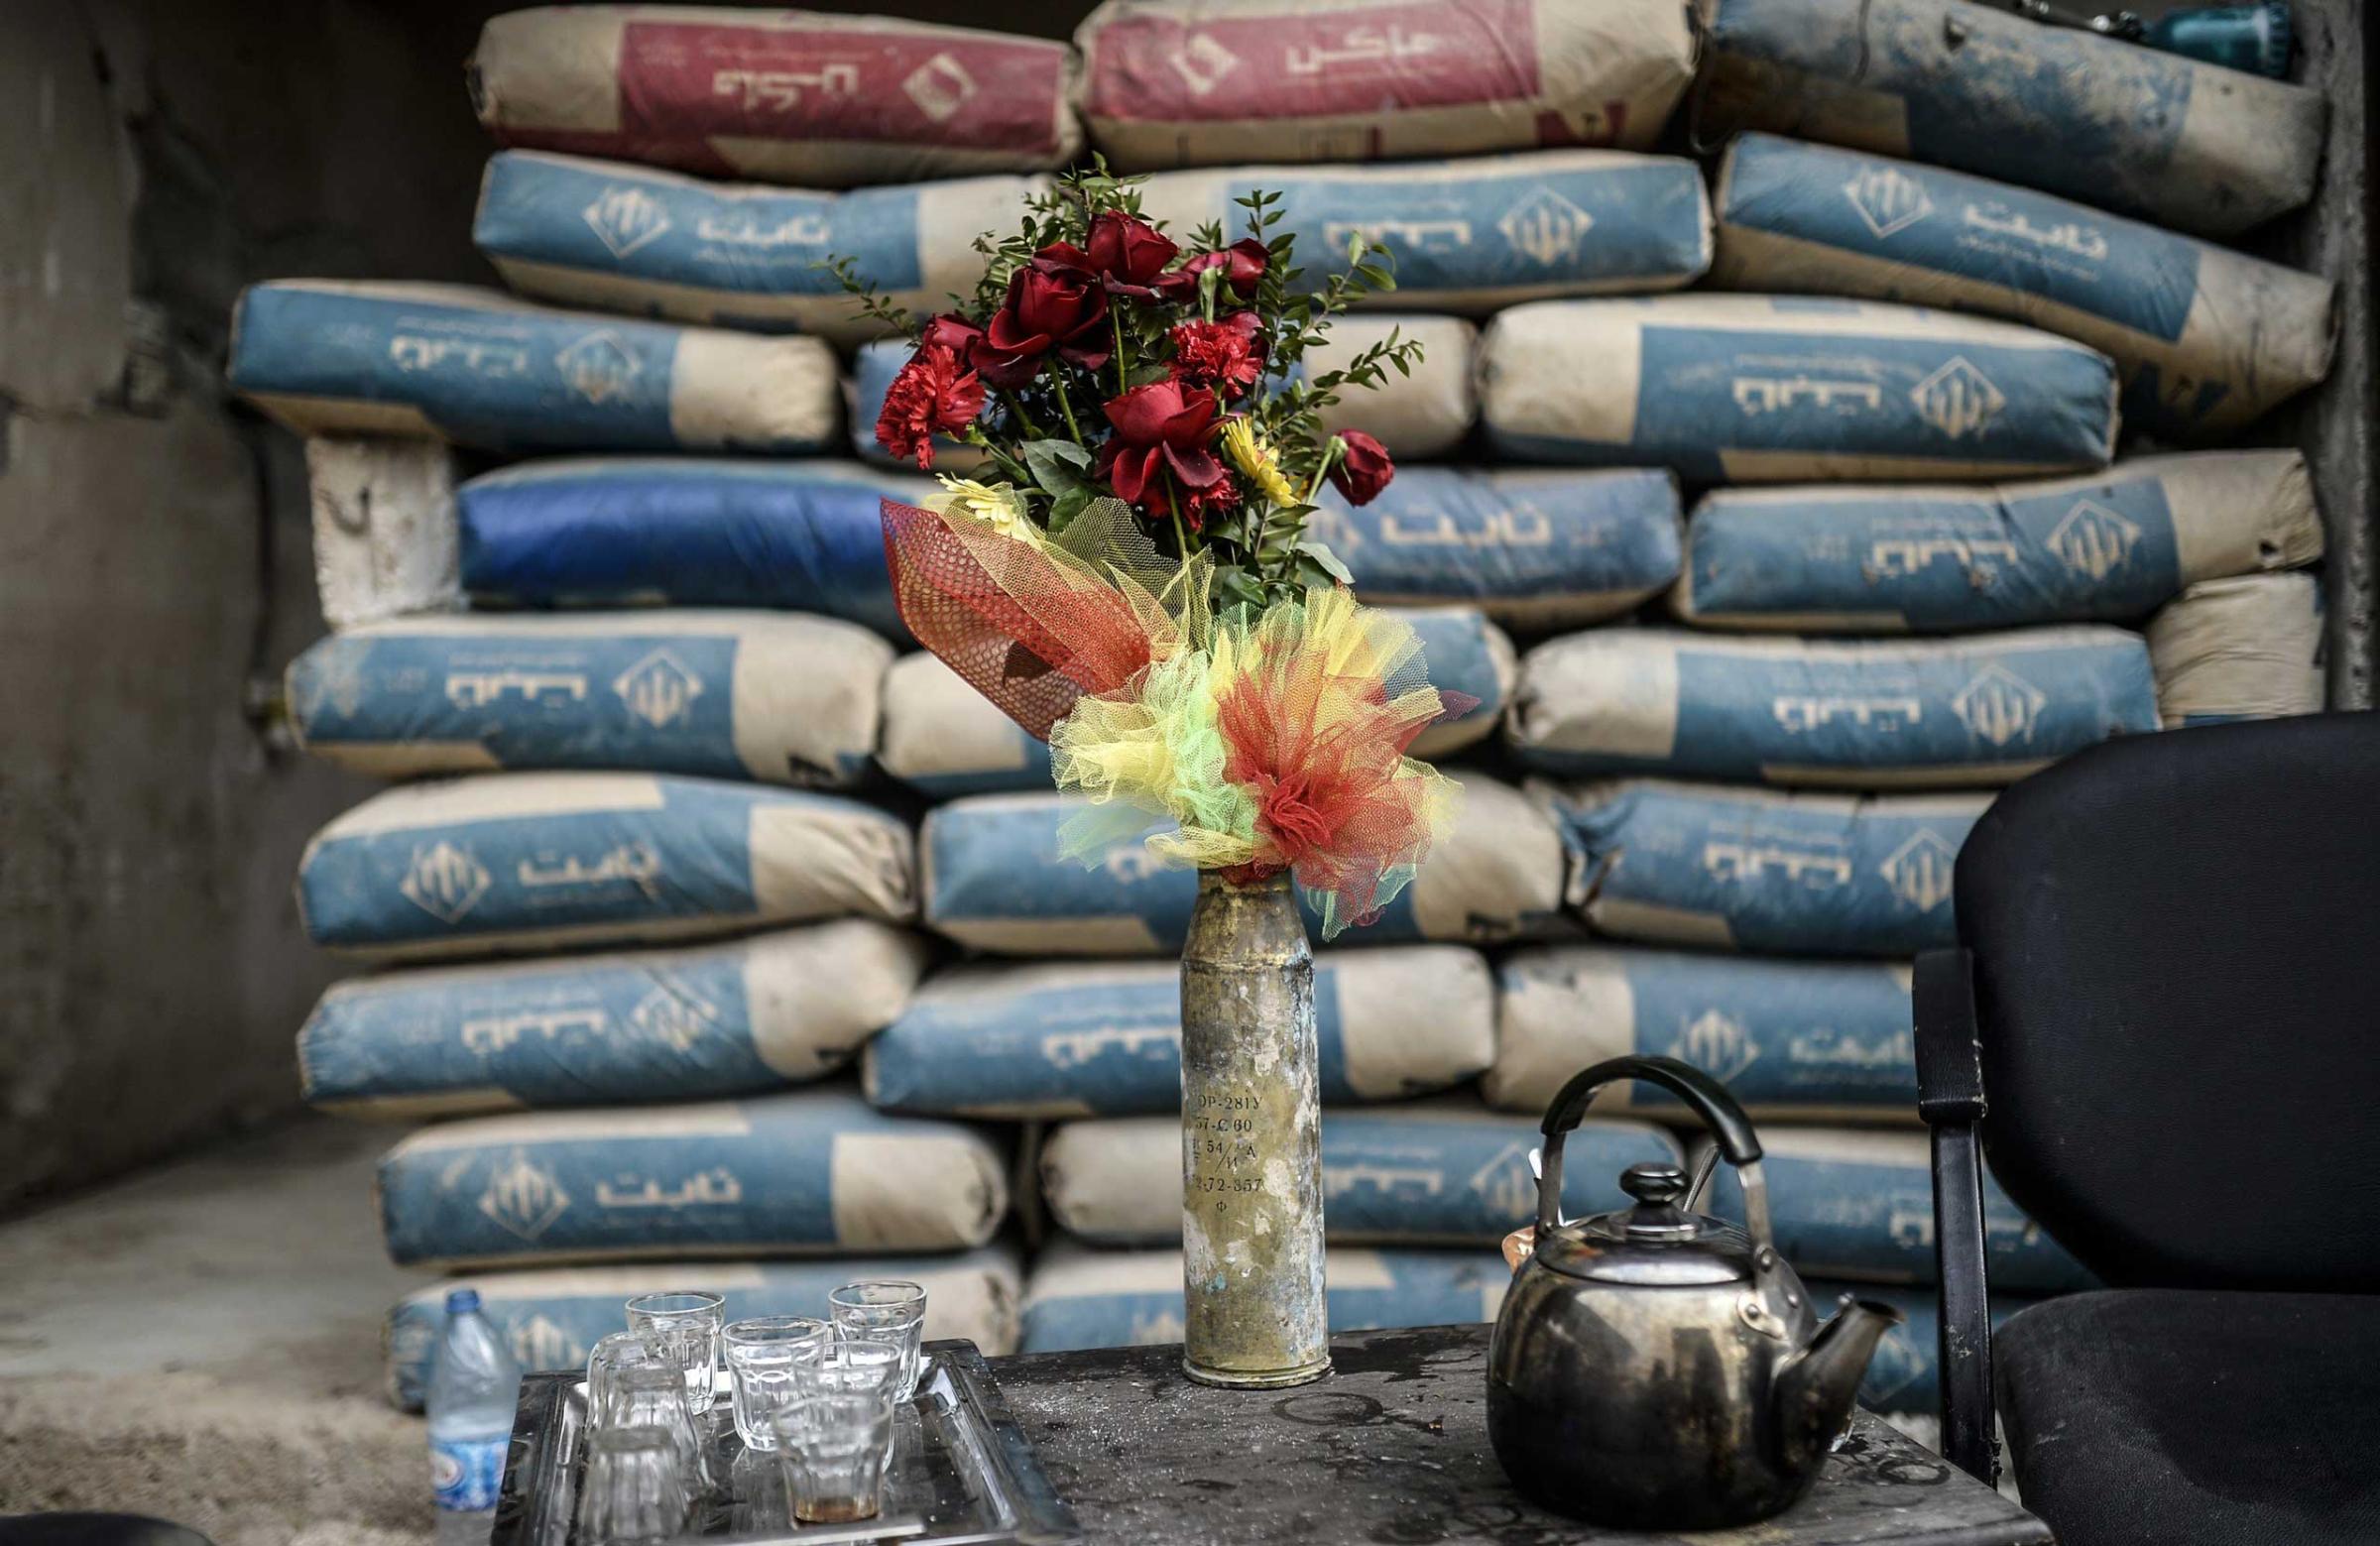 A shell is used as a vase in the Syrian border town of Kobani on Jan. 28, 2015.